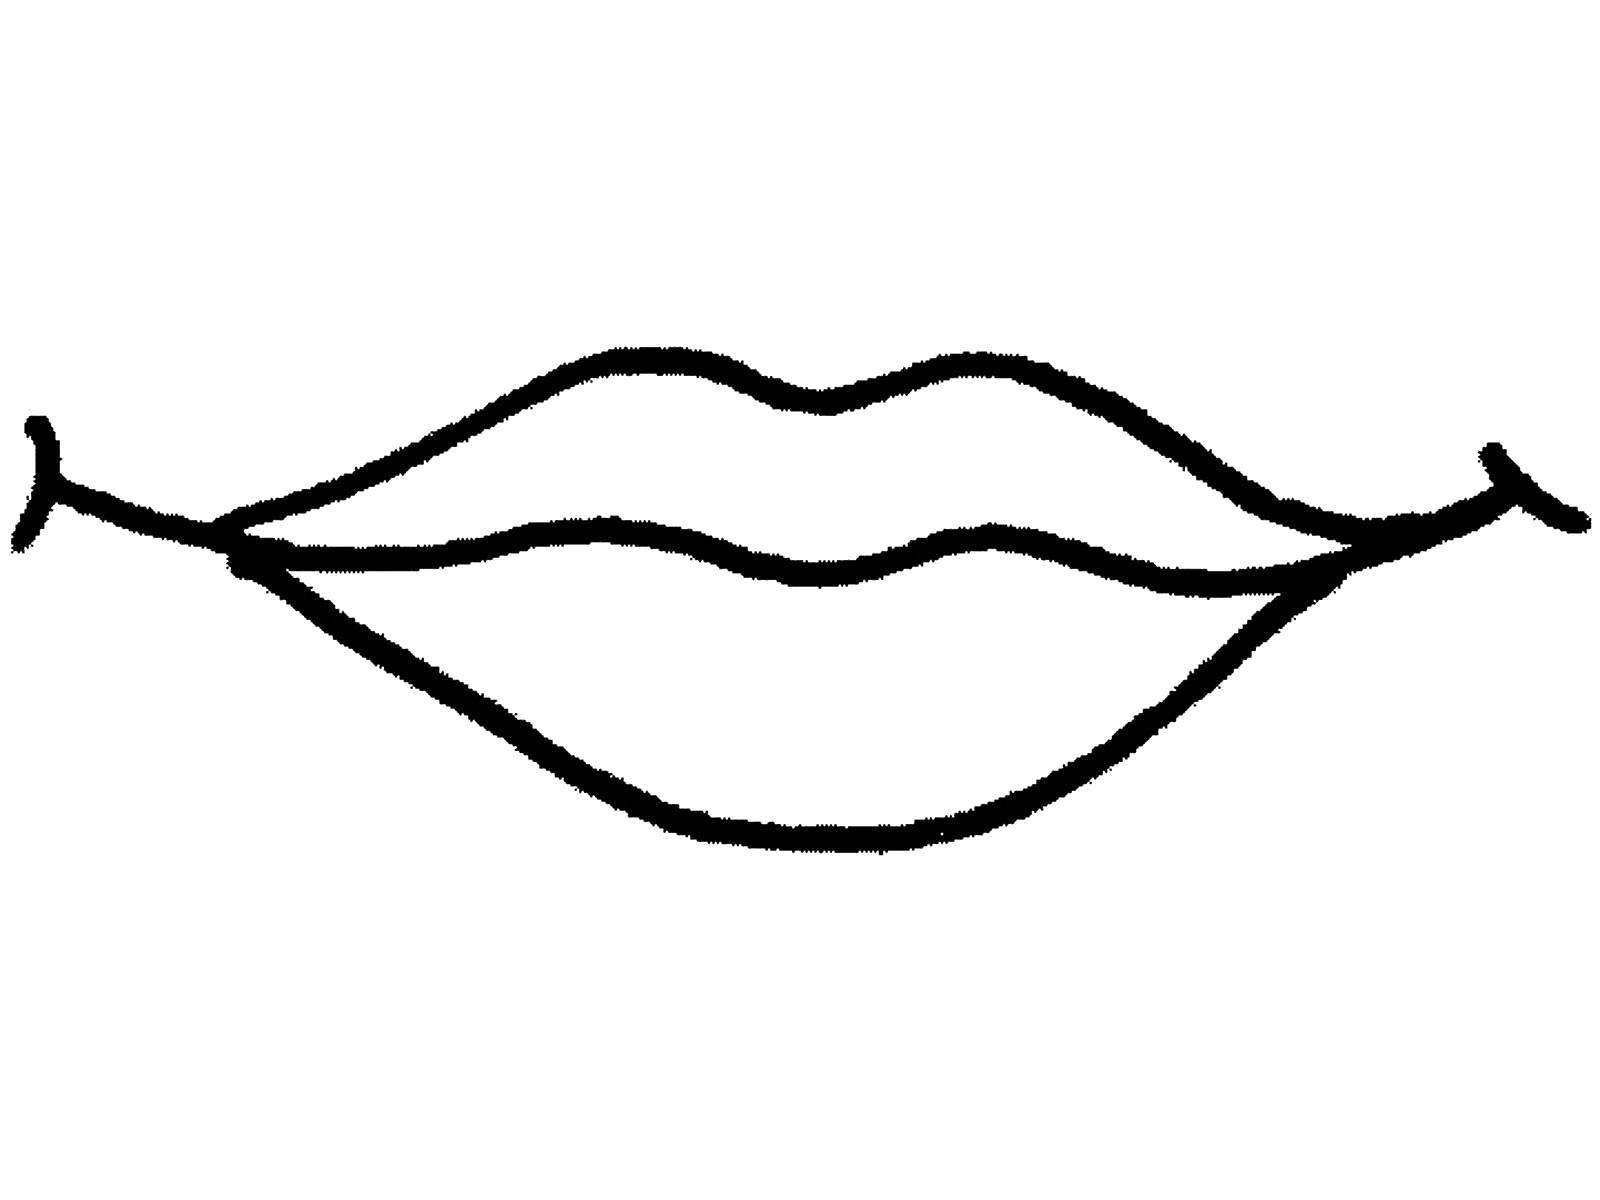 Coloring Lips, mouth. Category The structure of the body. Tags:  Lip.